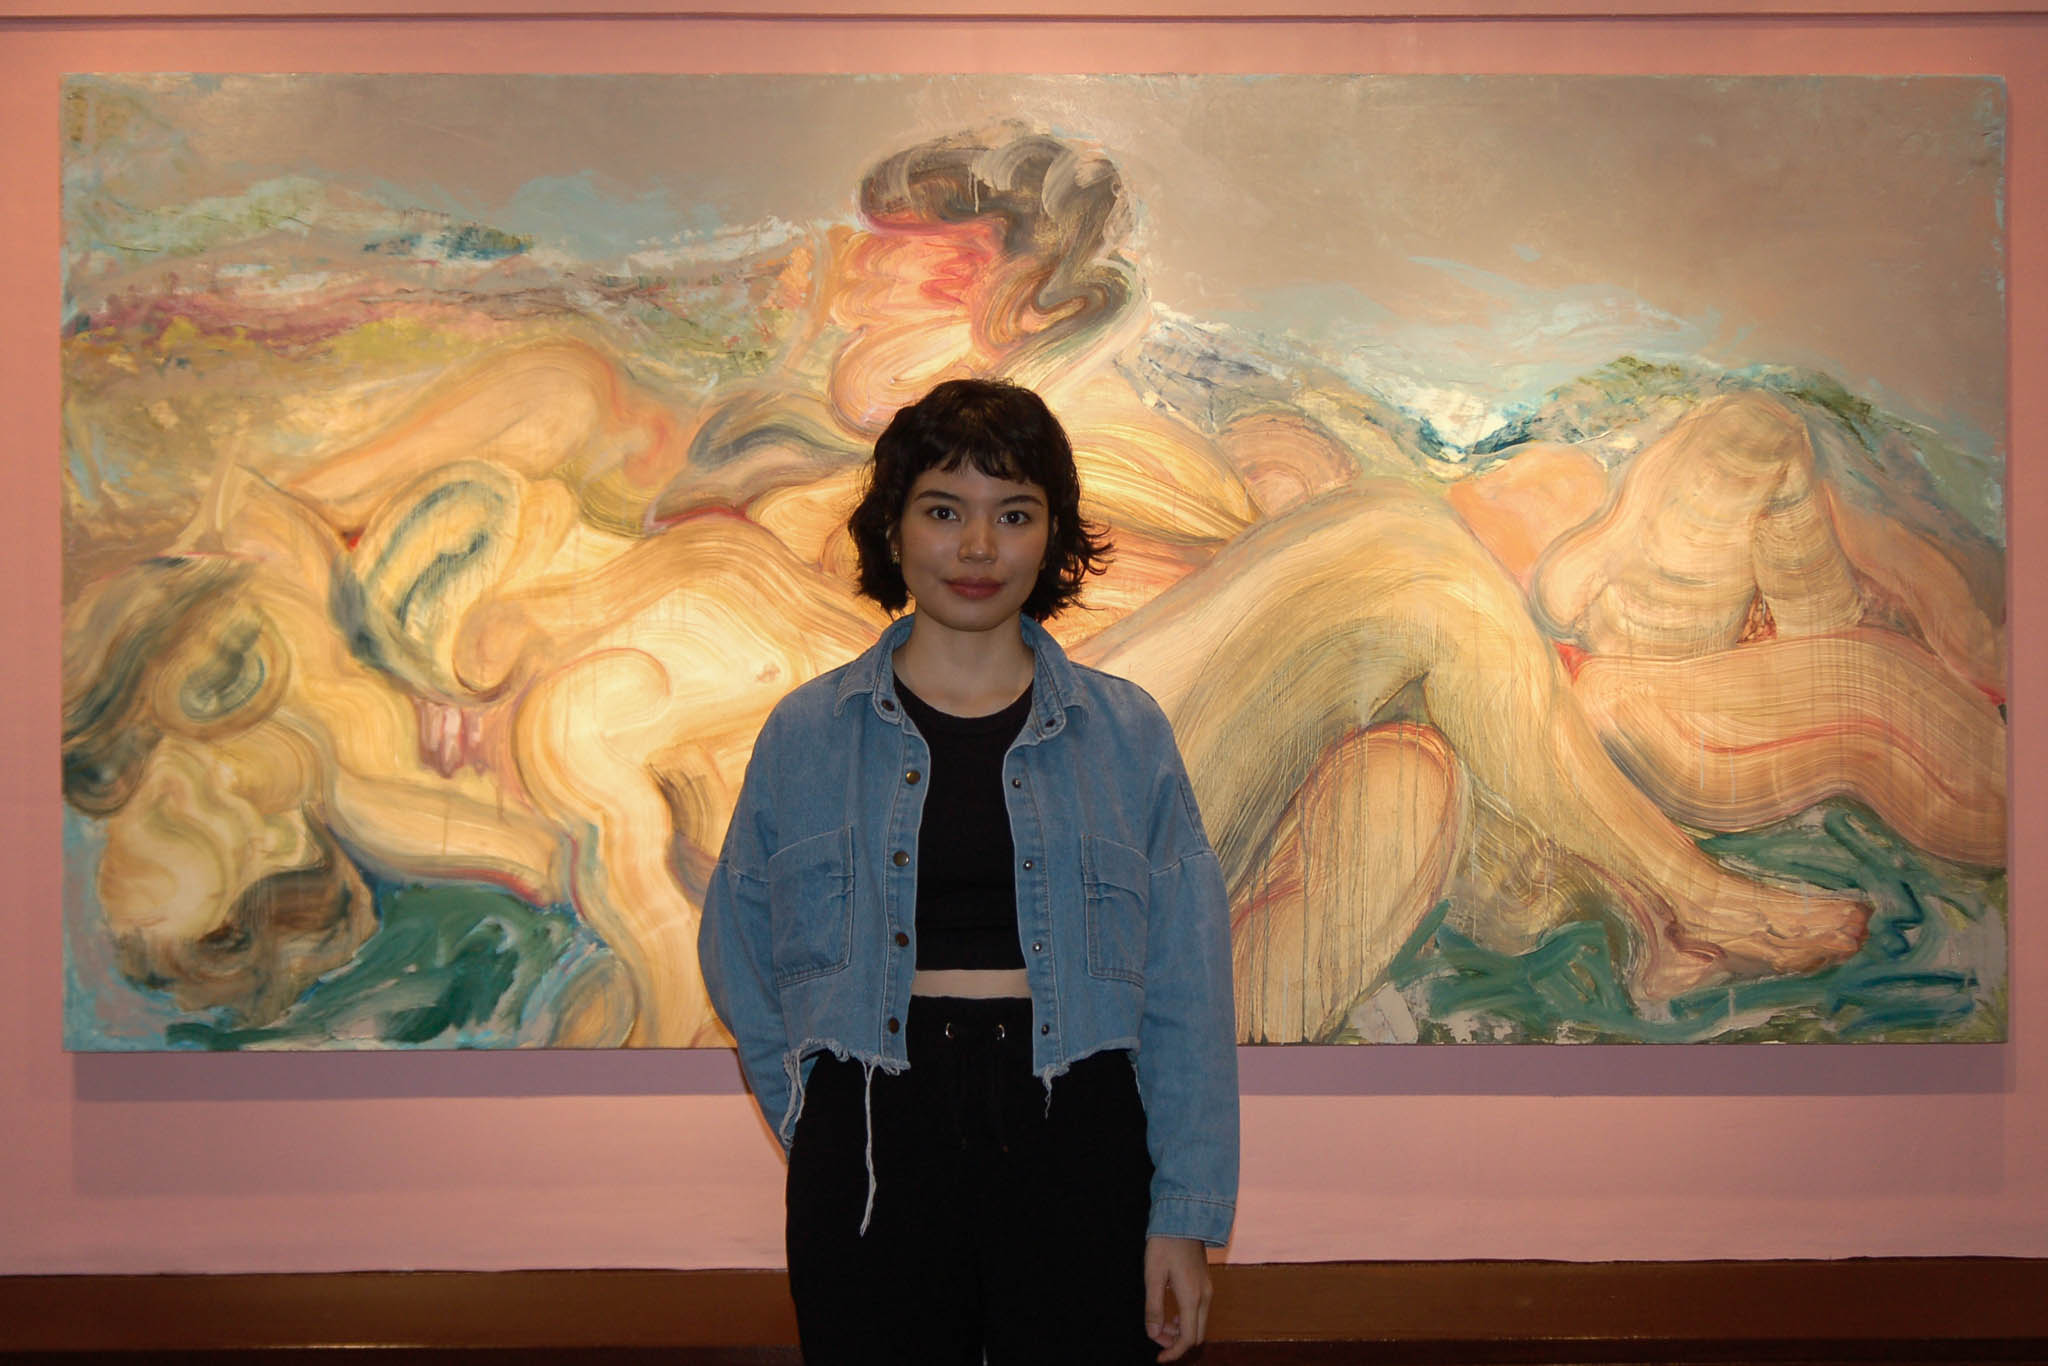 Y.S. Sehob with her work "Live"